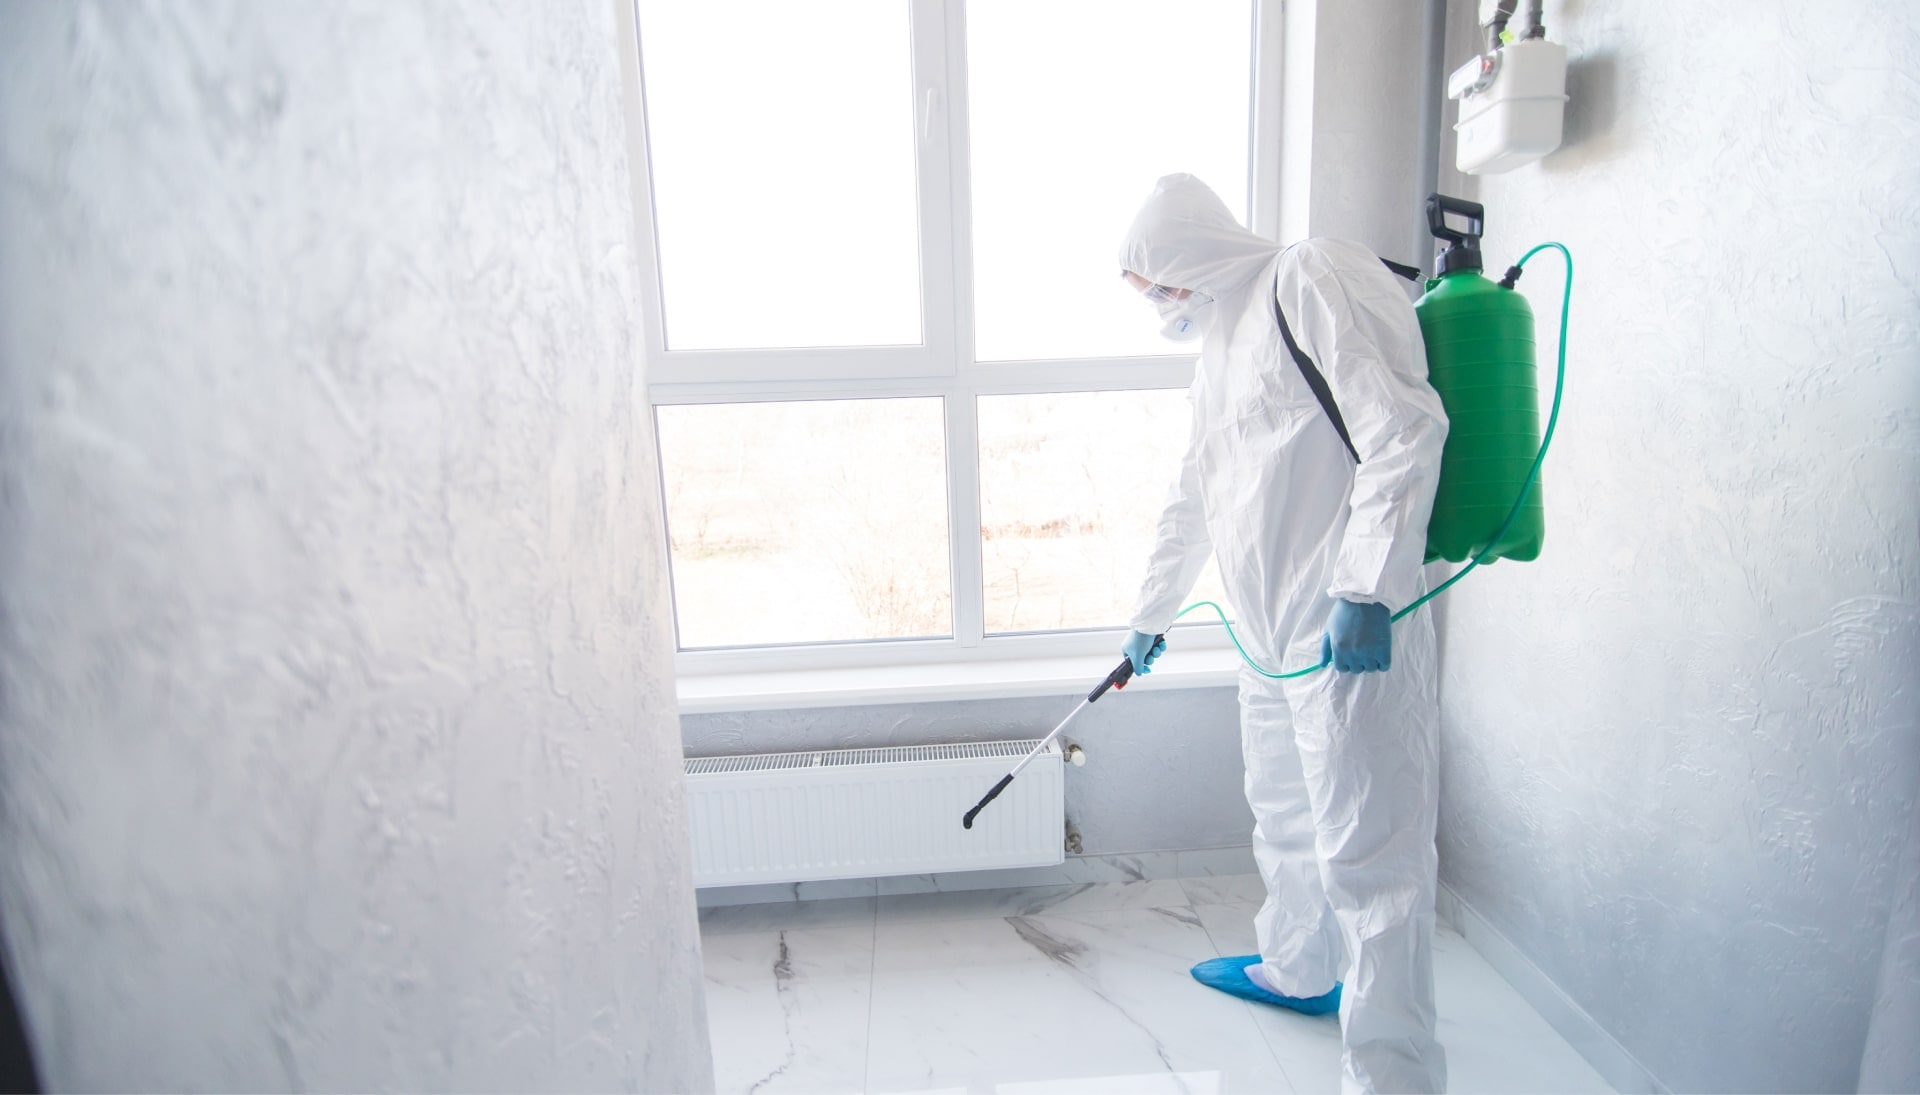 We provide the highest-quality mold inspection, testing, and removal services in the Boynton Beach, Florida area.